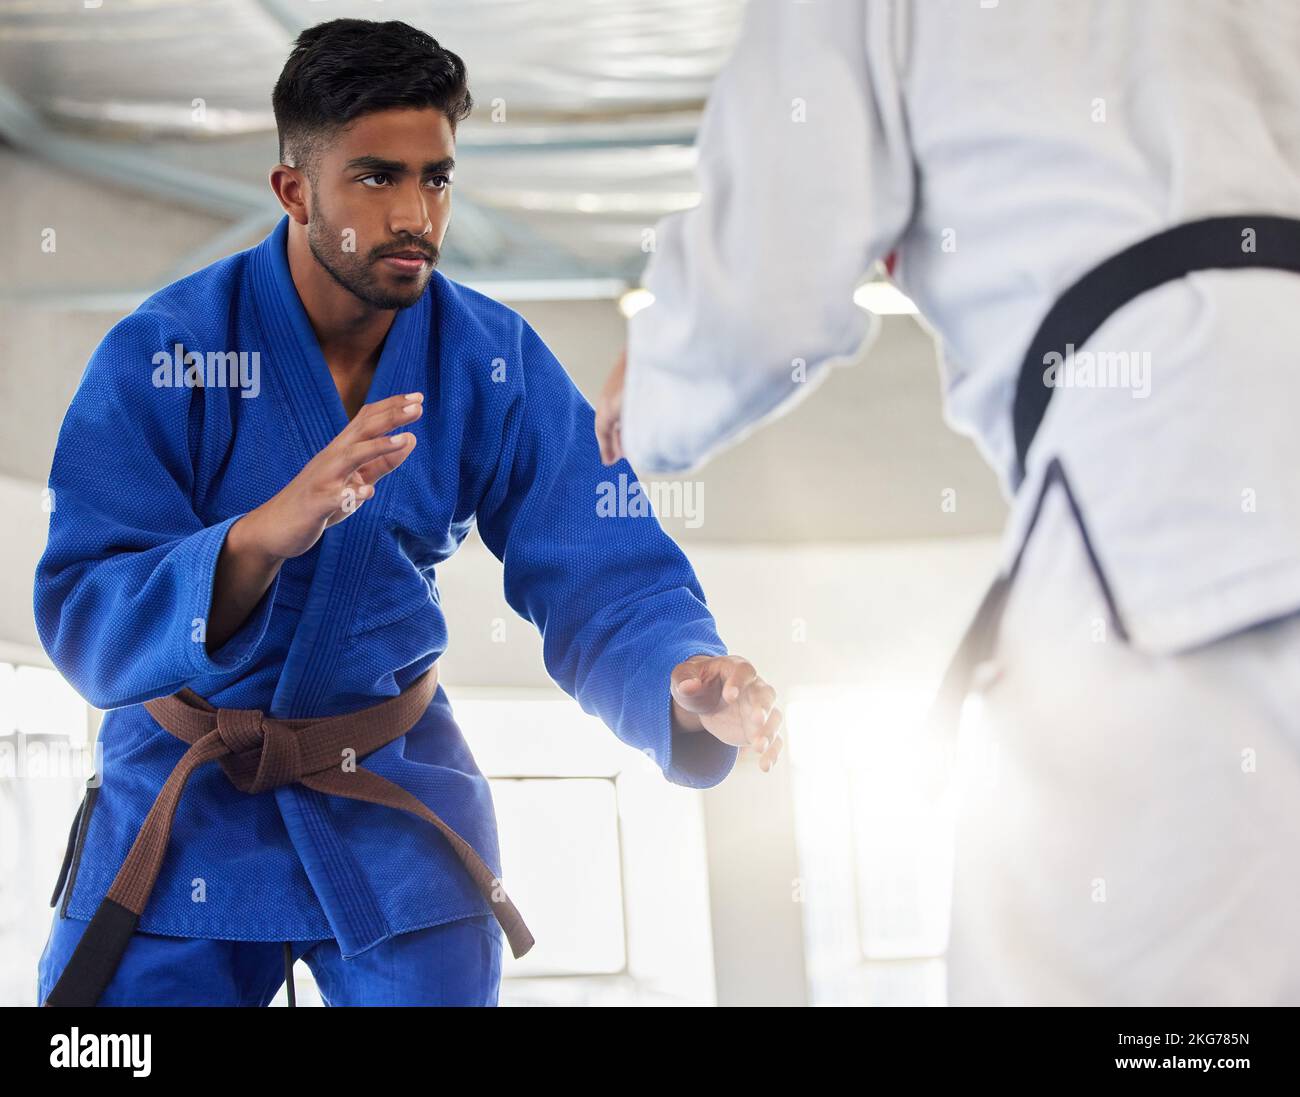 Martial arts, karate and student learning safety or self defense from a taekwondo expert or master in a dojo. Focus, fitness and fighting instructor Stock Photo